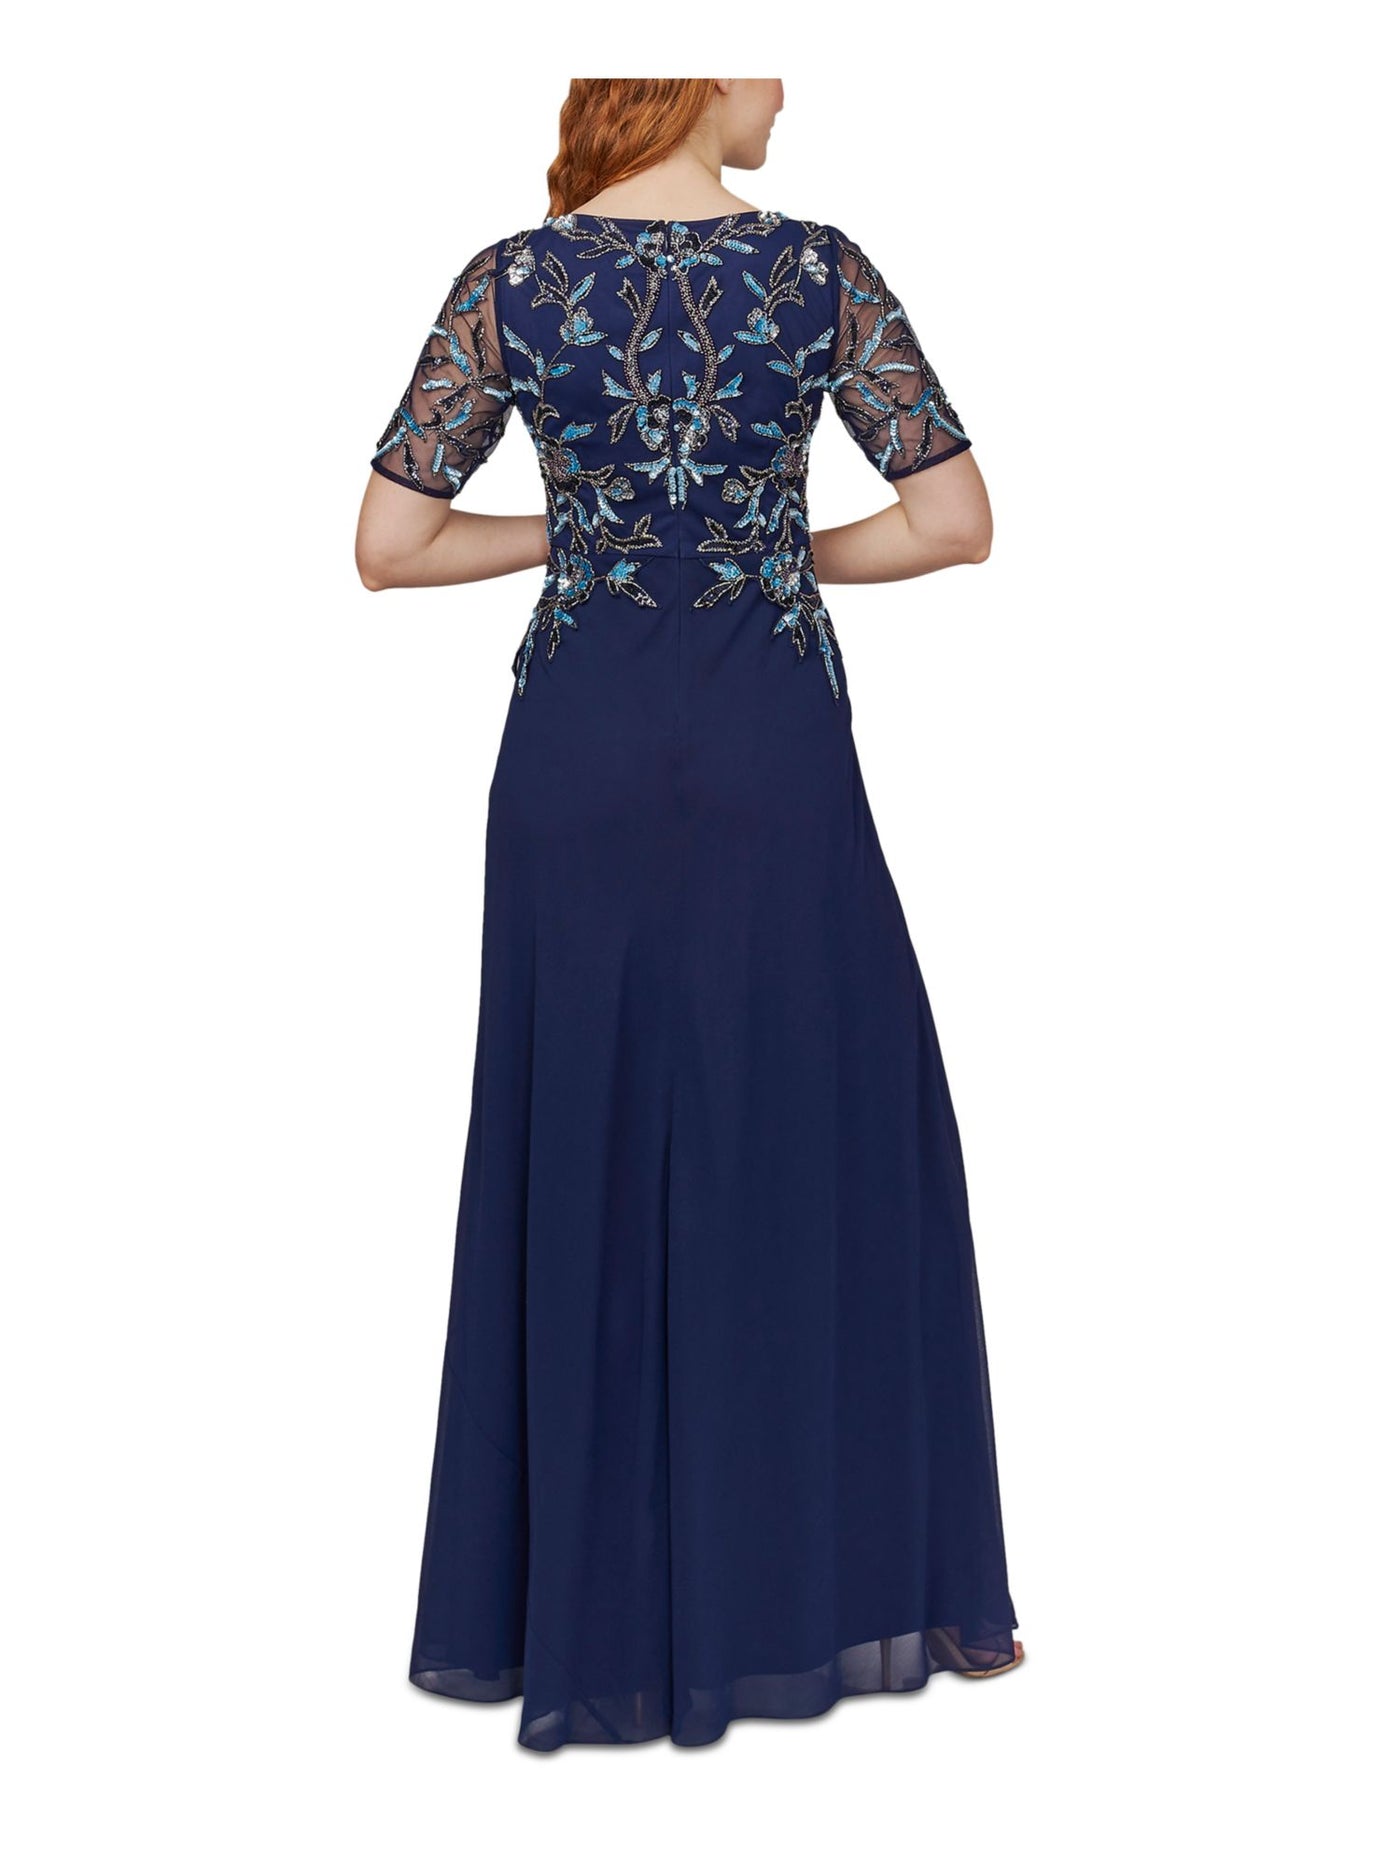 ADRIANNA PAPELL Womens Navy Beaded Sequined Zippered Lined Short Sleeve Round Neck Full-Length Evening Gown Dress 4